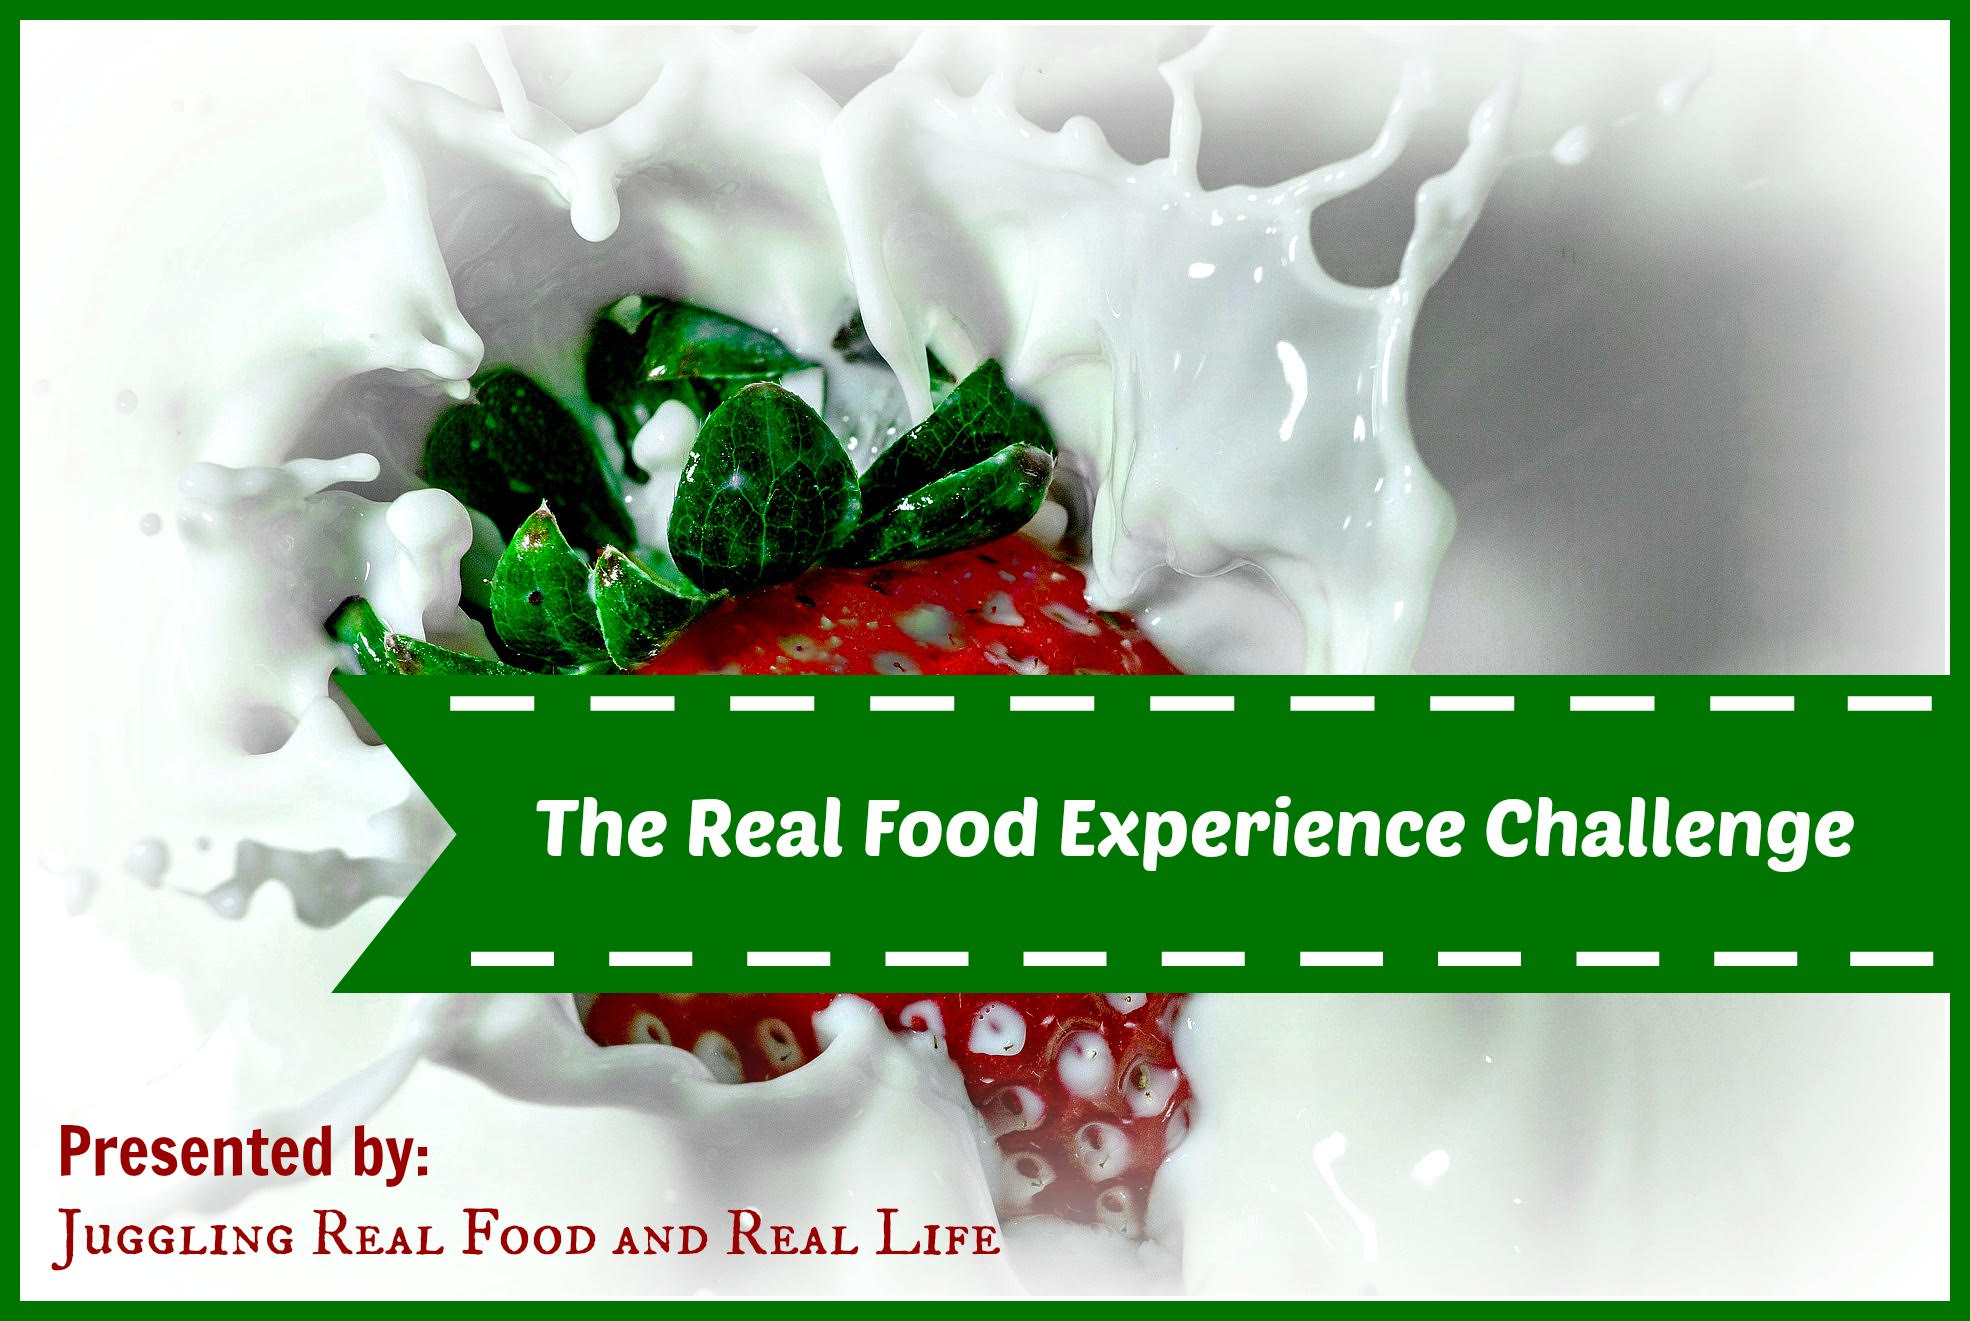 The Real Food Experience Challenge